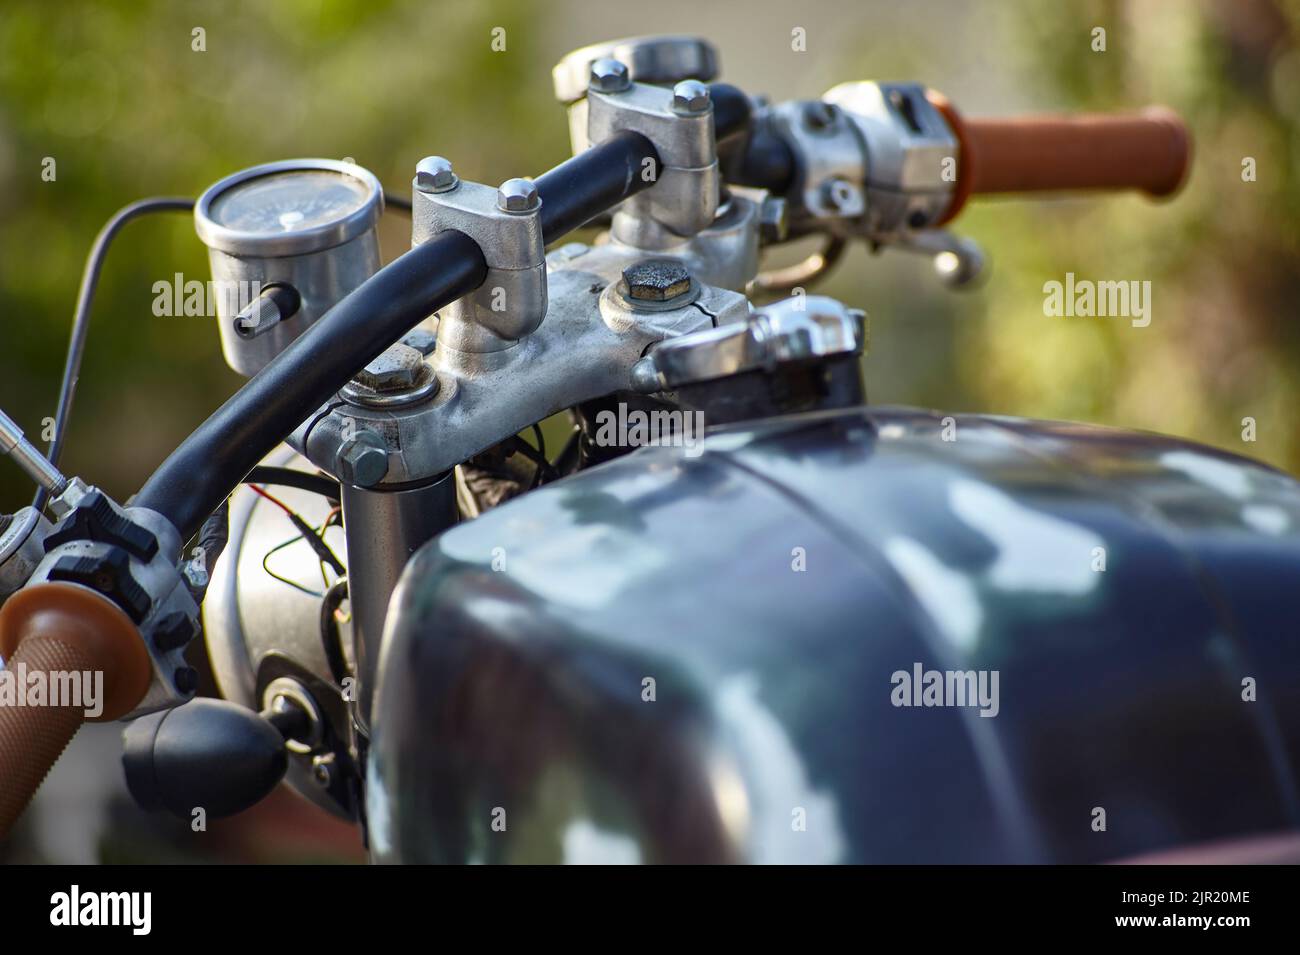 Front view of the handlebars of an old rat style motorcycle with signs of corrosion and wear that have matured over time. Stock Photo